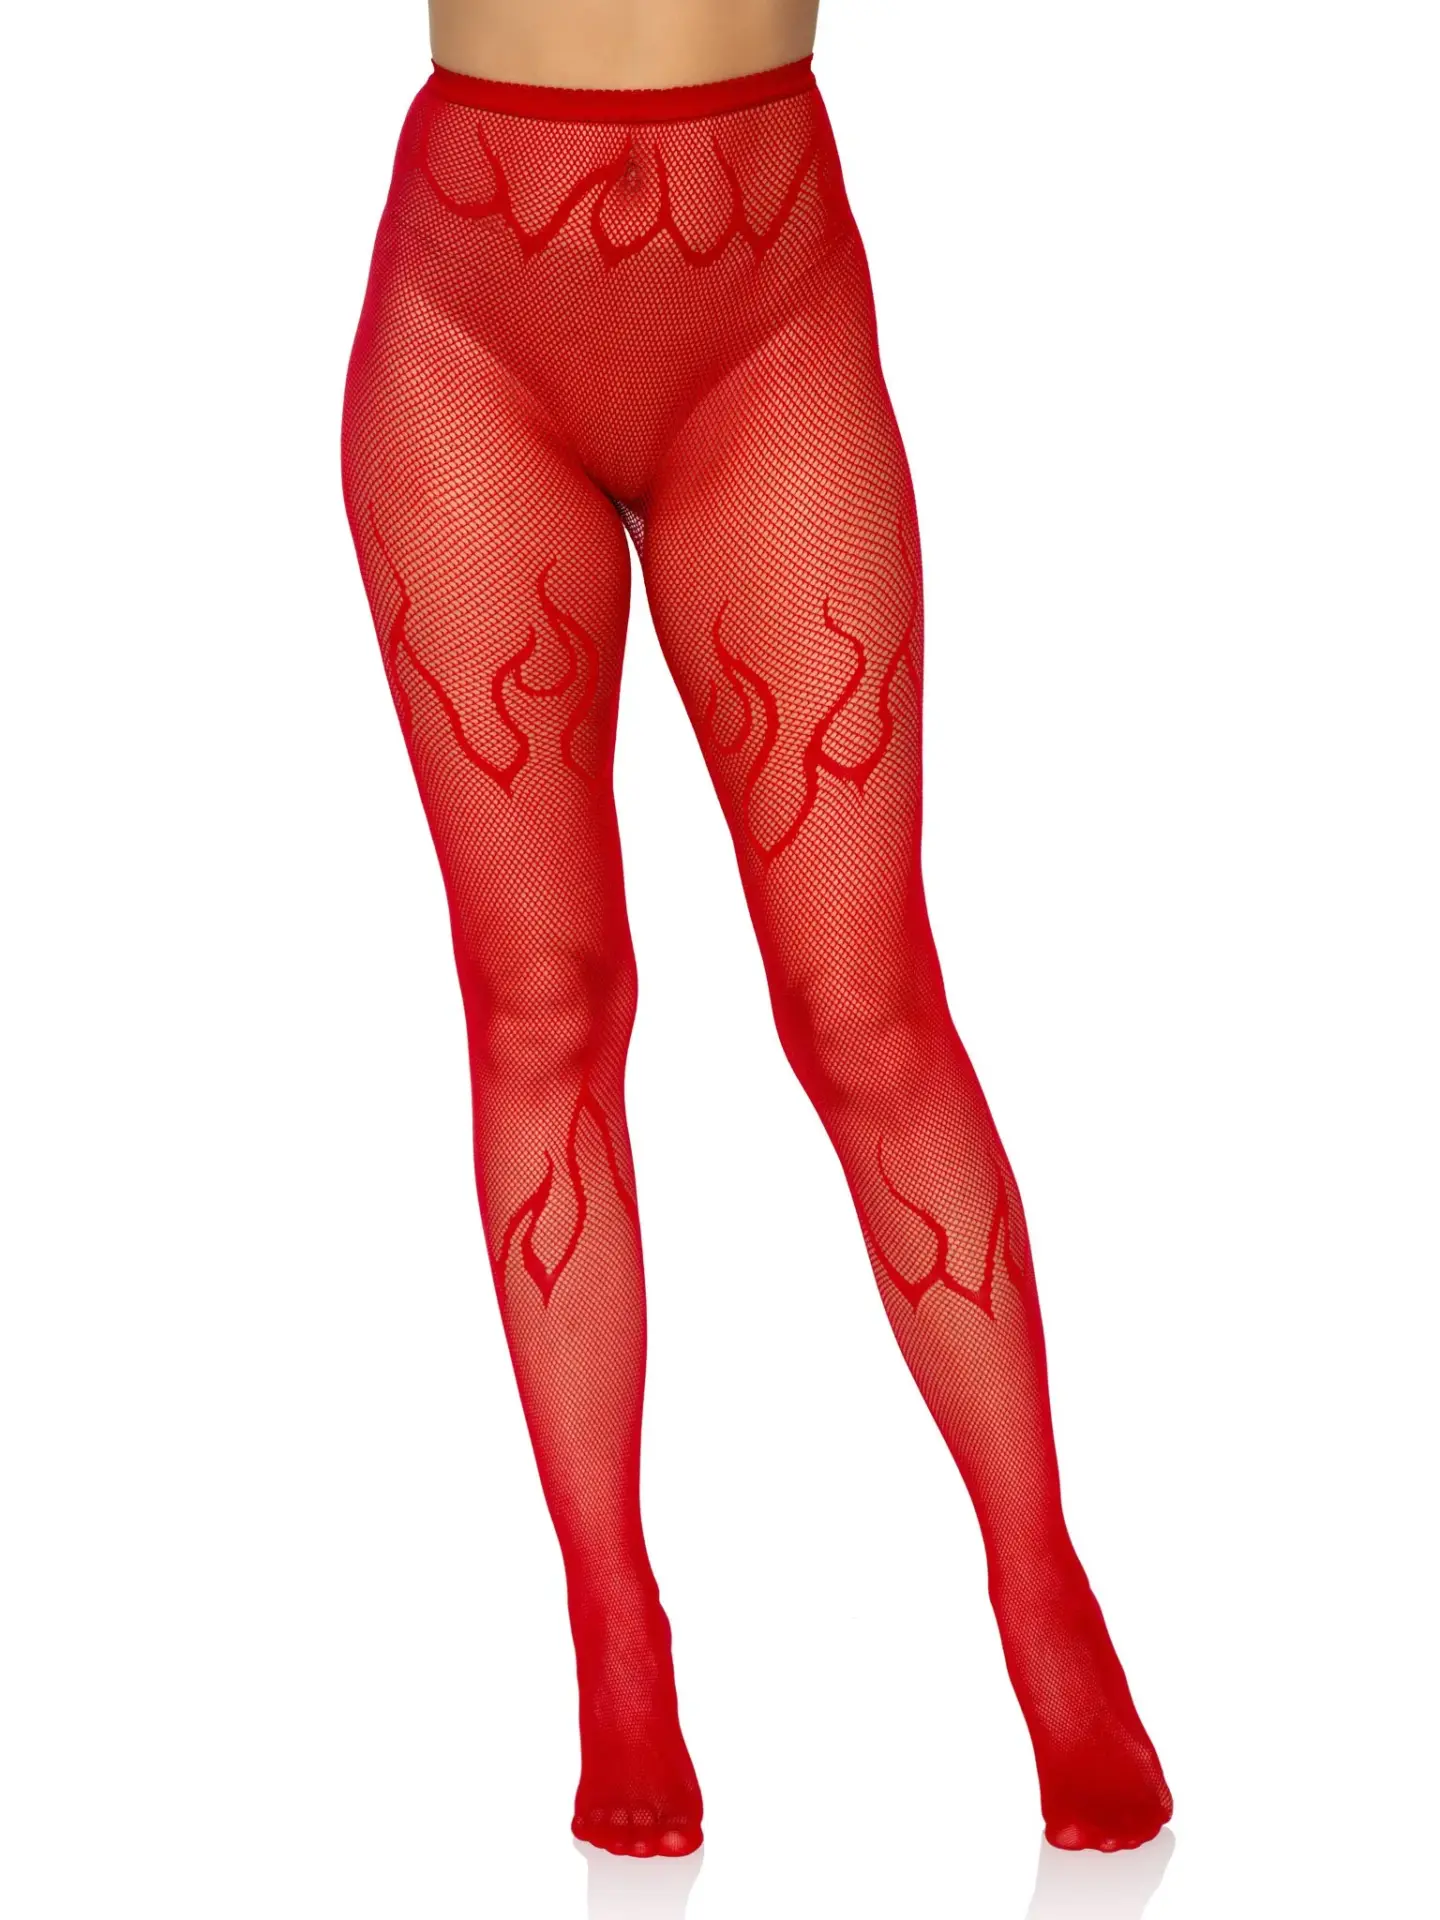 9288 Leg Avenue Red Flame Fishnet Tights 3